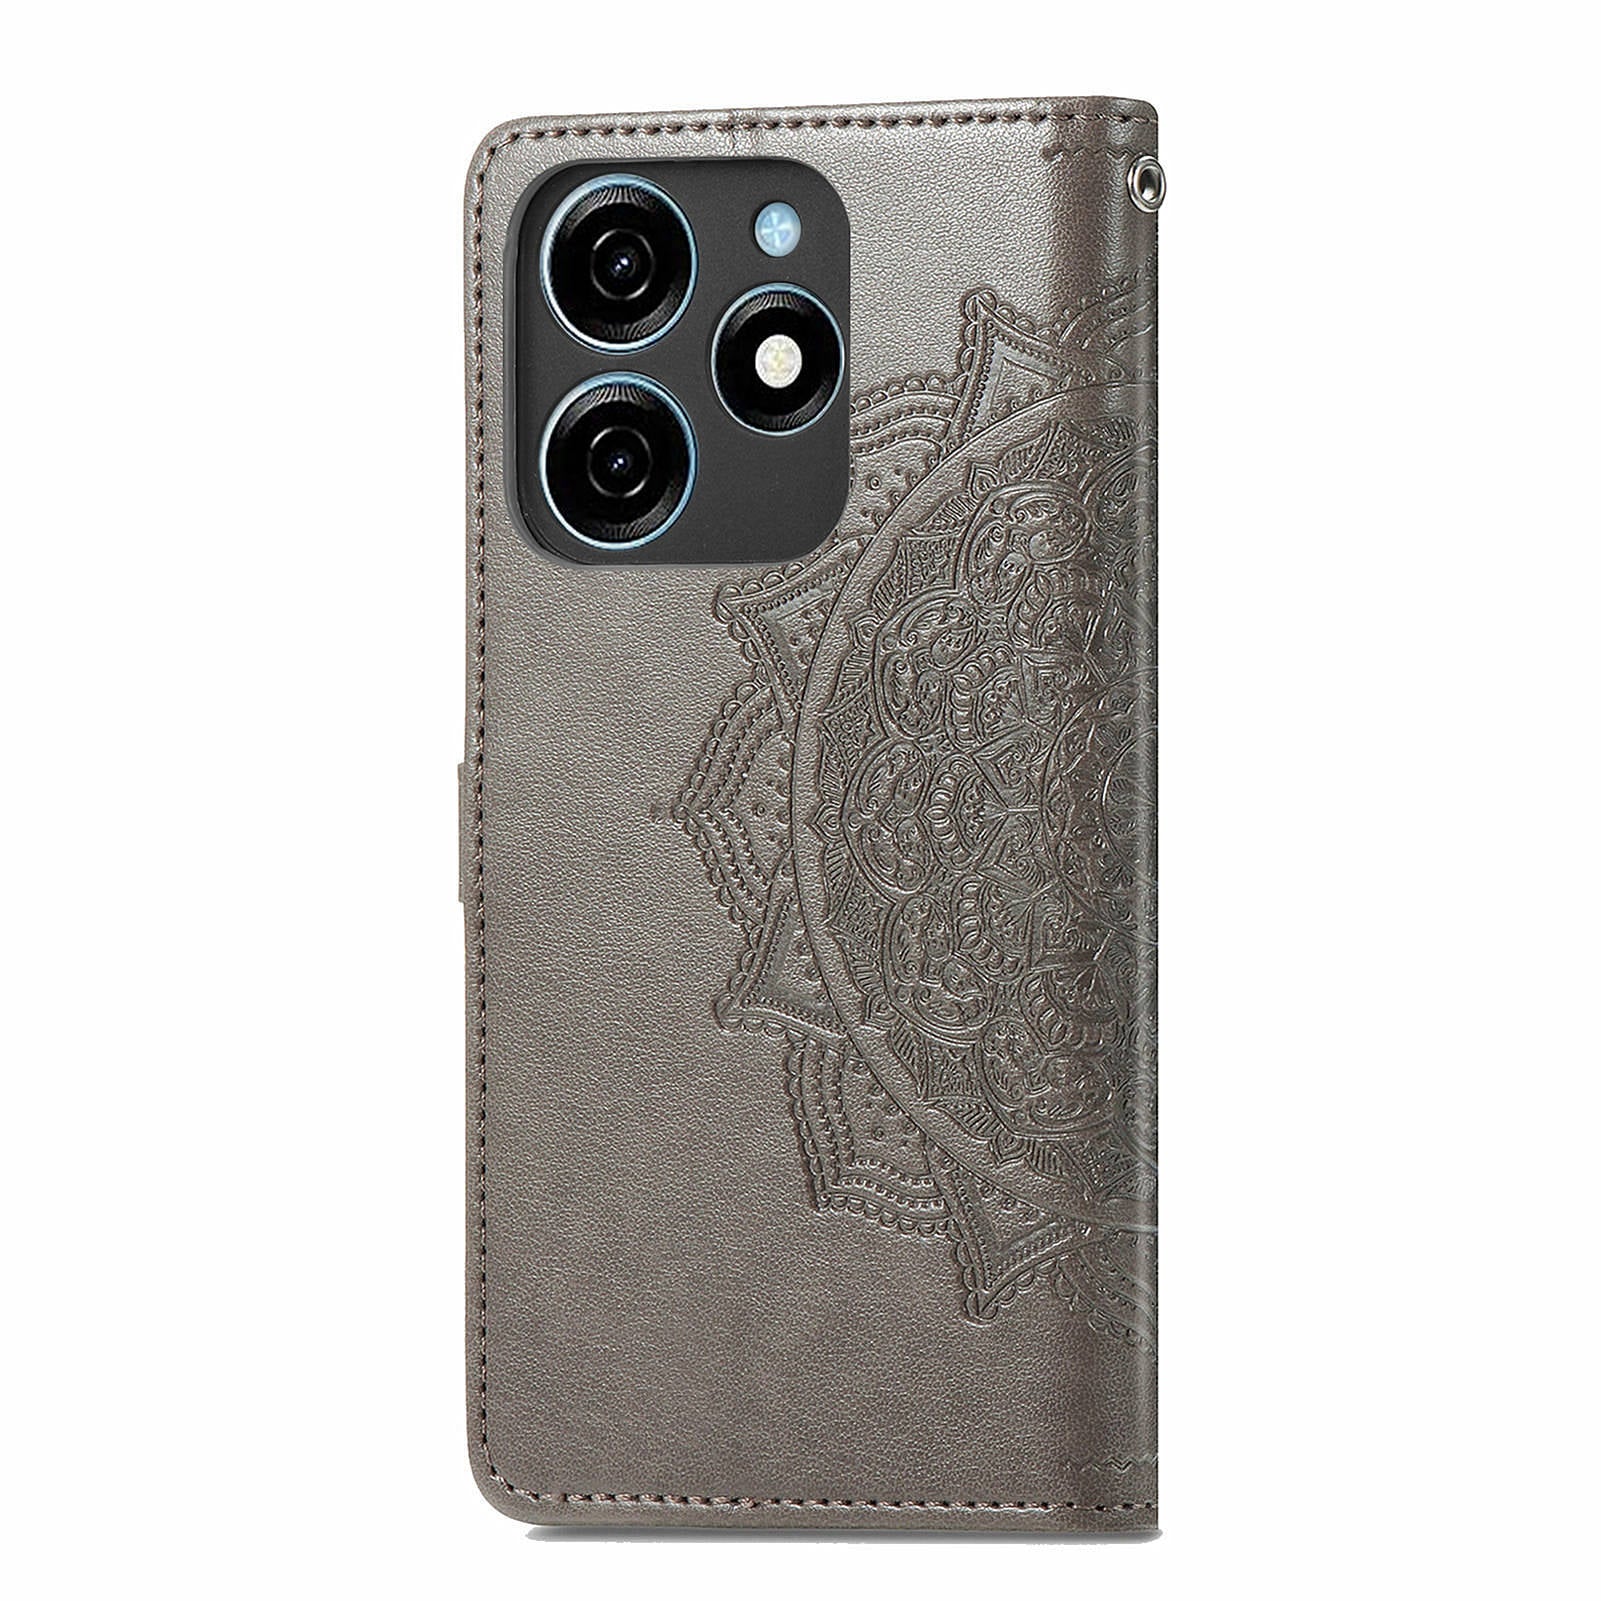 For Transsion Tecno Spark 20C Wallet Case Mandala Flower Leather Phone Cover - Grey